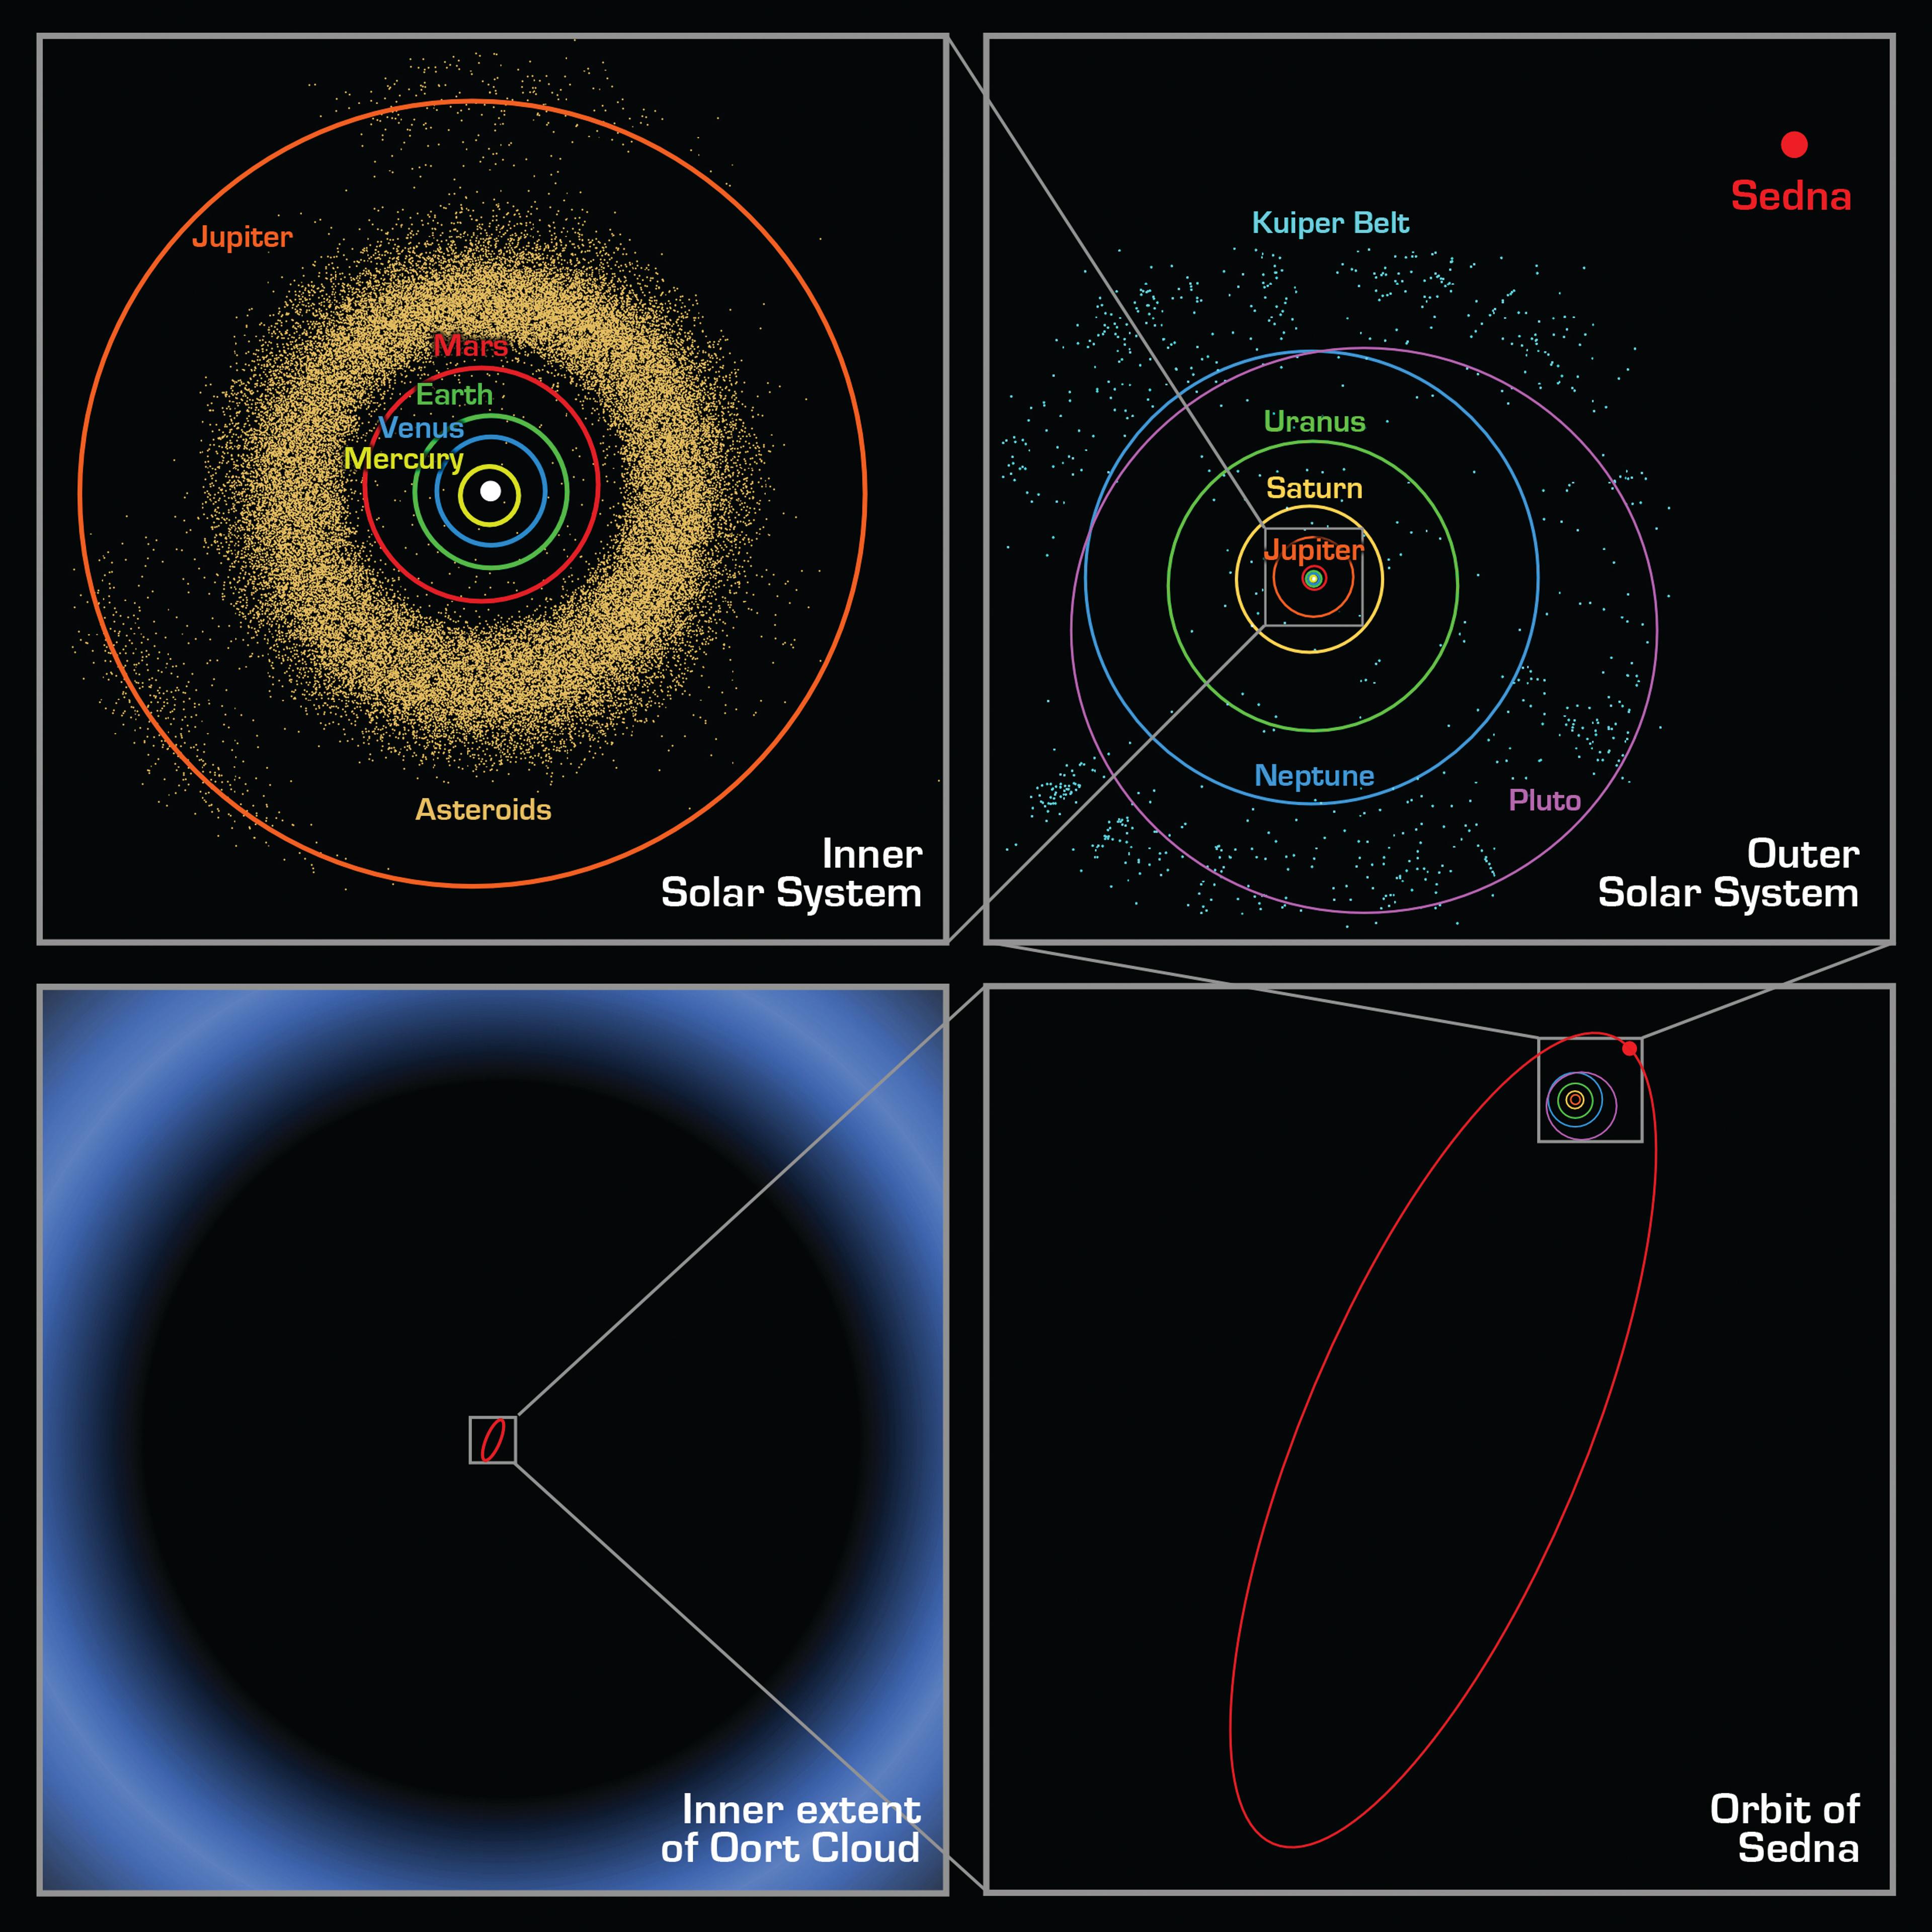 The first panel shows the orbits of the inner planets, including Earth, and the asteroid belt that lies between Mars and Jupiter. In the second panel, Sedna is shown well outside the orbits of the outer planets and the more distant Kuiper Belt objects. Sedna’s full orbit is illustrated in the third panel along with the object’s current location. Sedna is nearing its closest approach to the Sun; its around 11,400-year orbit typically takes it to far greater distances. The final panel zooms out much farther, showing that even this large elliptical orbit falls inside what was previously thought to be the inner edge of the Oort cloud. The Oort cloud is a spherical distribution of cold, icy bodies lying at the limits of the Sun’s gravitational pull.